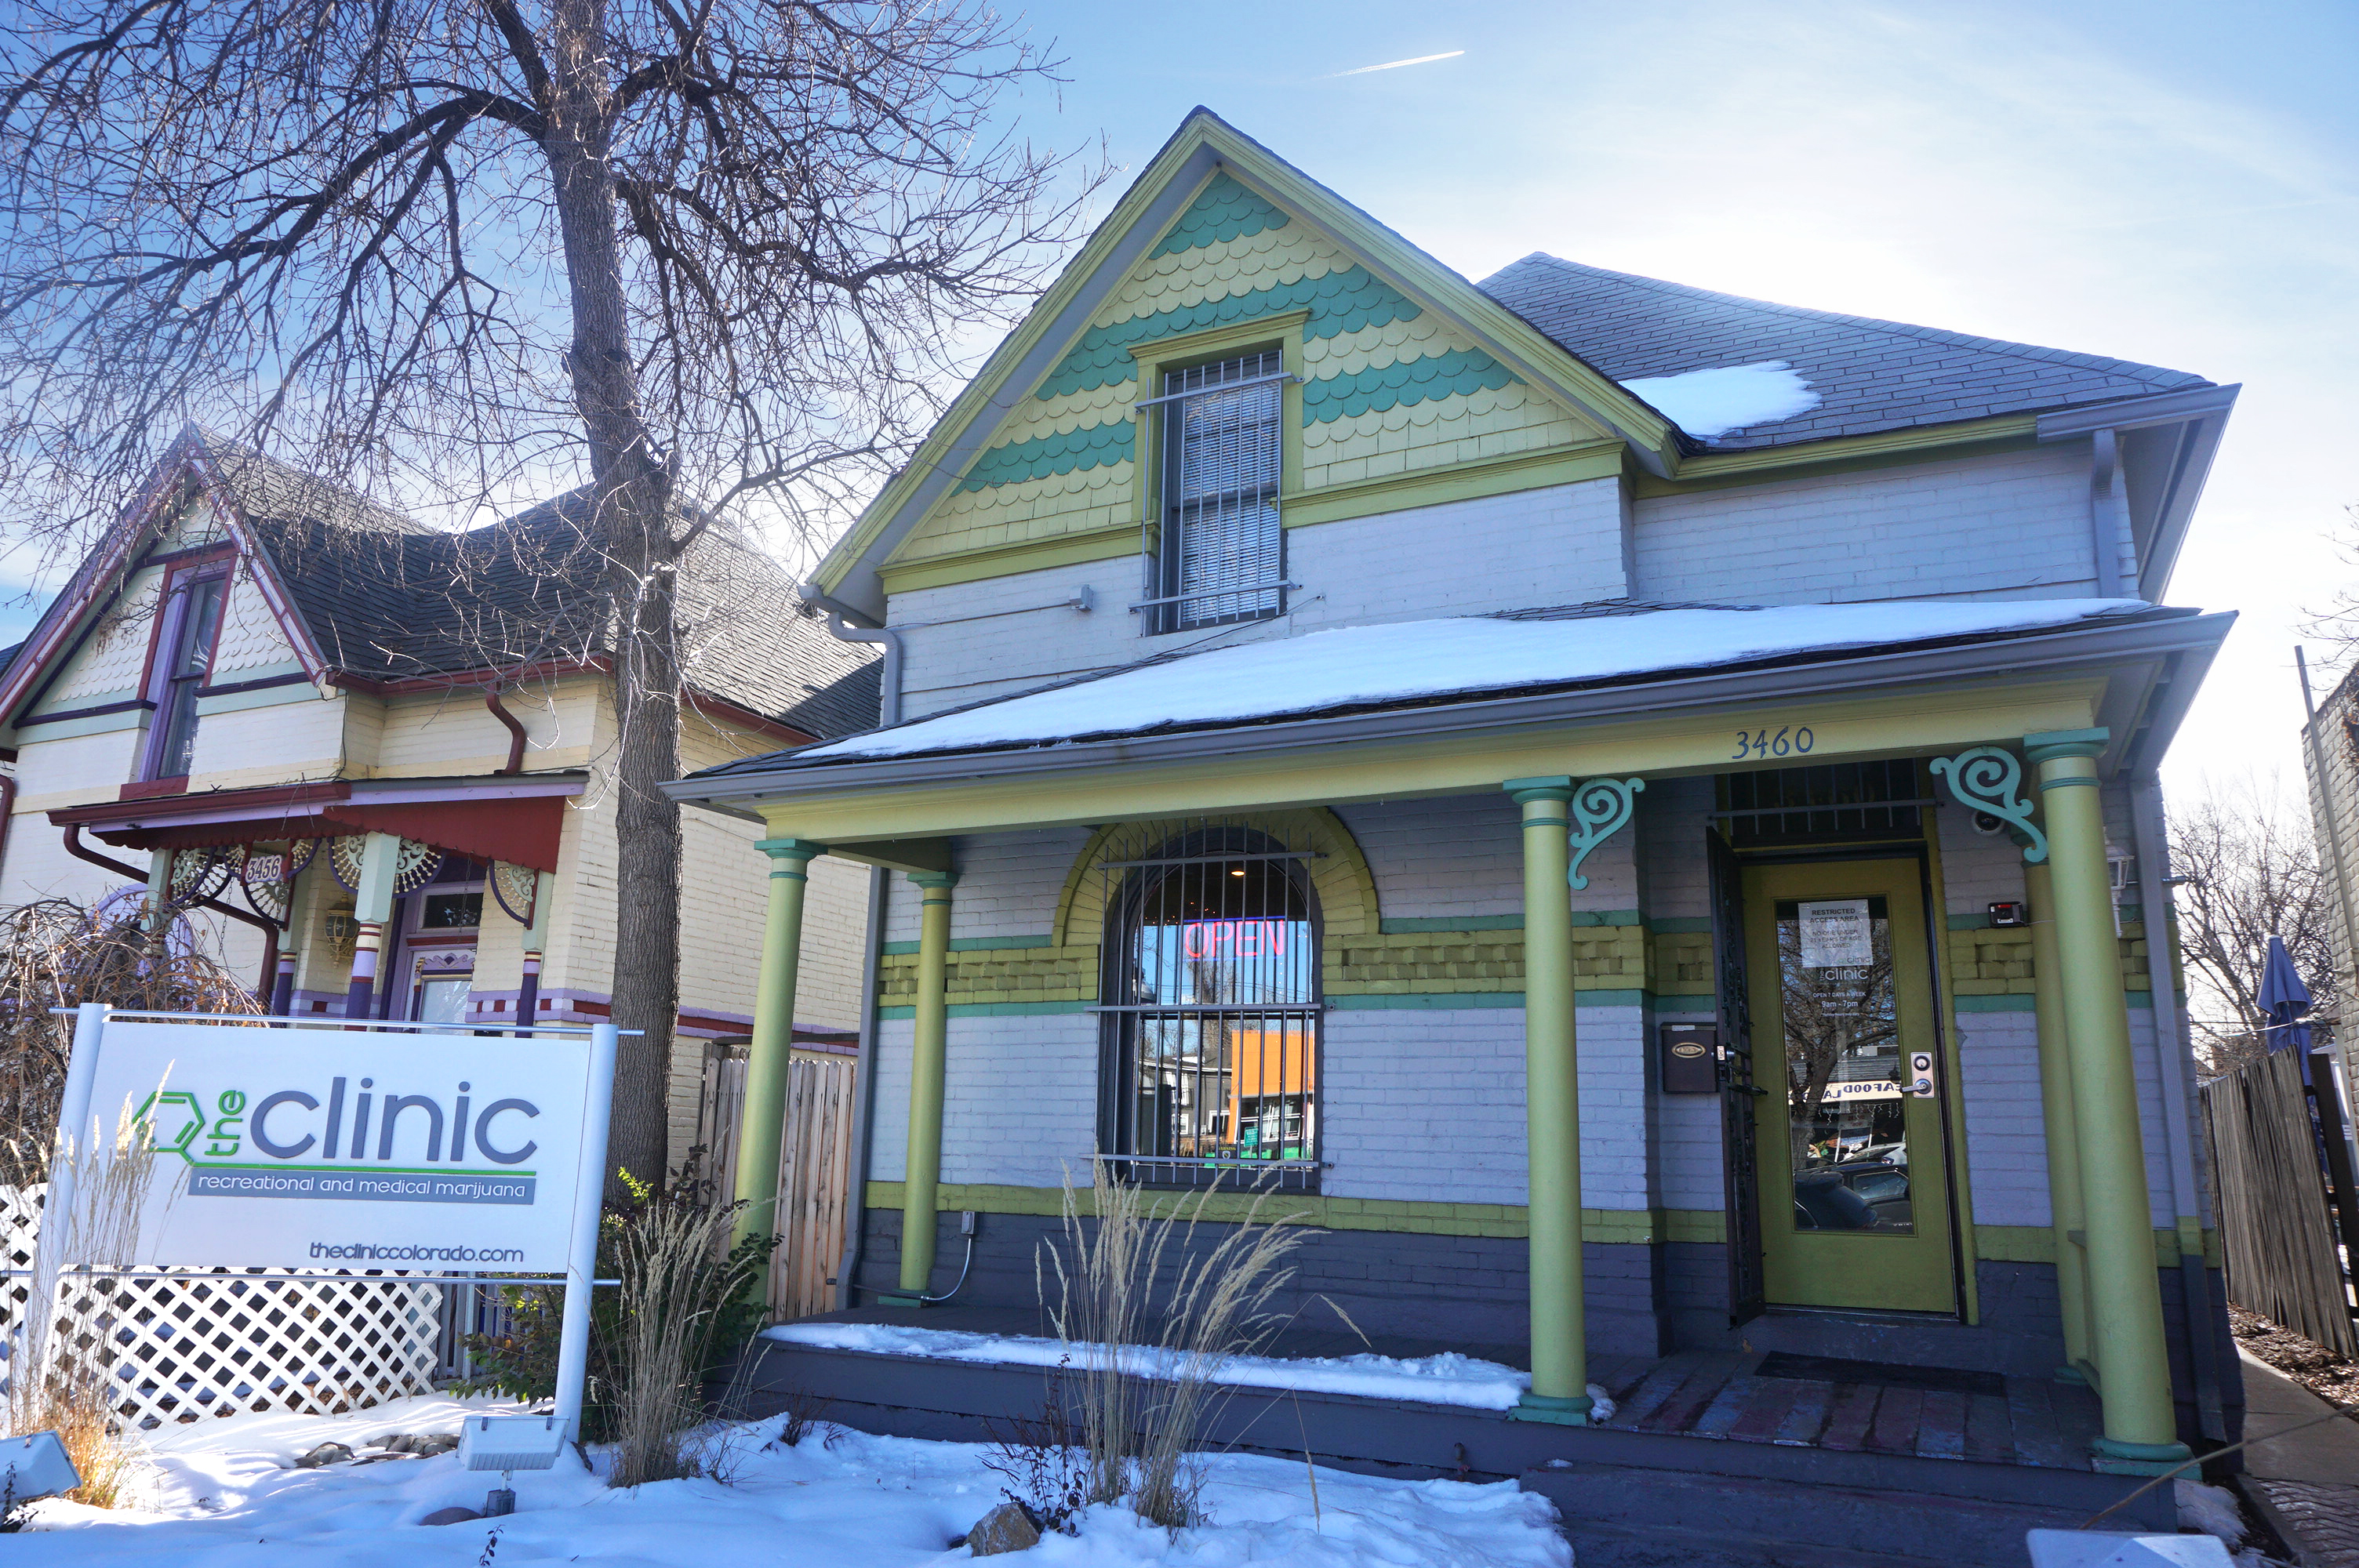 The Clinic operates a location in the Highlands at 3460 W. 32nd Ave. Photo by George Demopoulos.